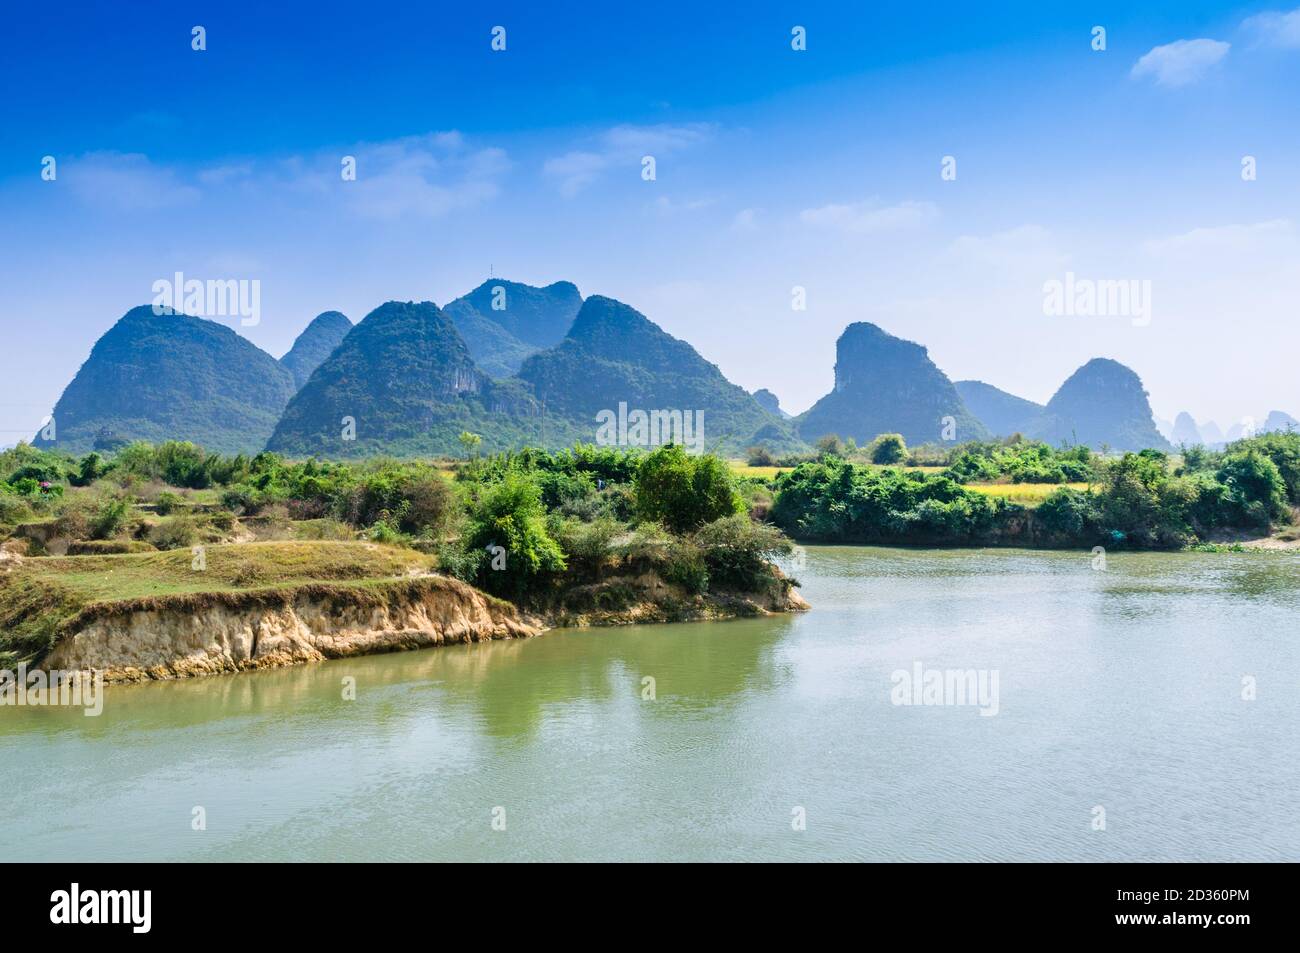 Karst mountain and river scenery Stock Photo